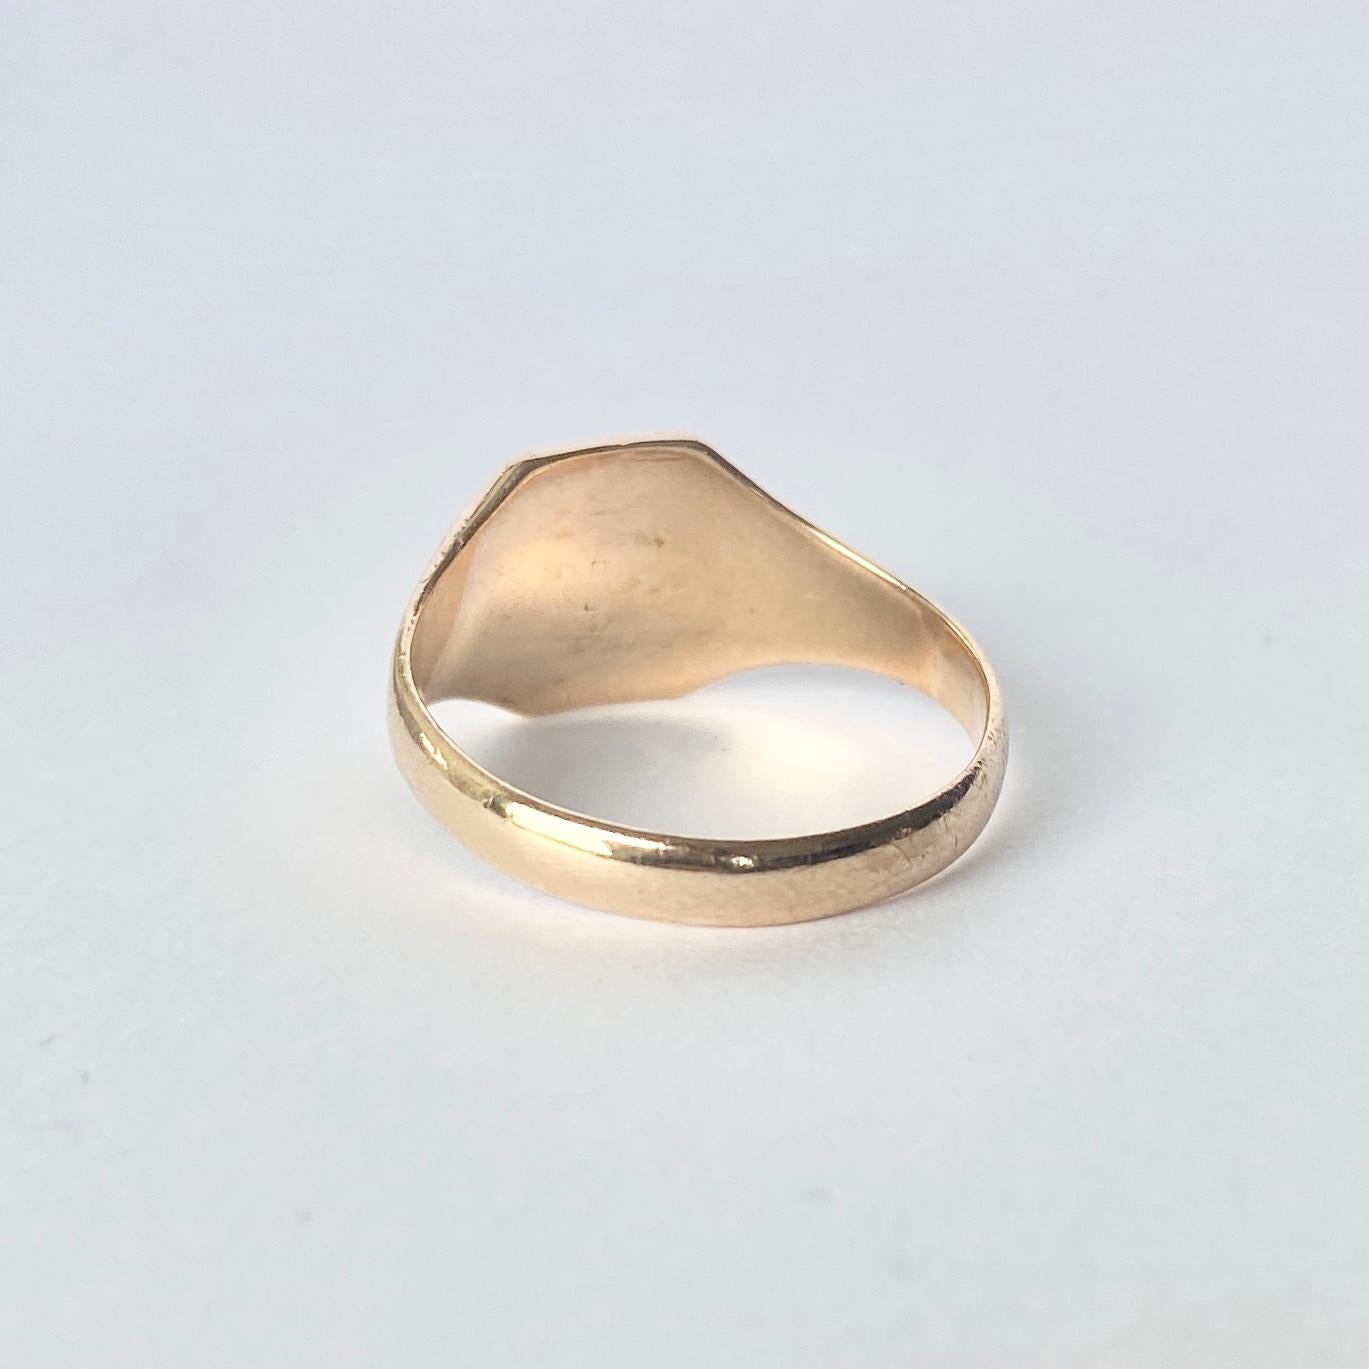 This sweet signet is modelled in 9ct gold and has a face with the initials 'GEJ' engraved into it.  Fully hallmarked London 1941.

Ring Size: W or 11
Face Dimensions: 11.5x11.5mm 

Weight: 4.9g